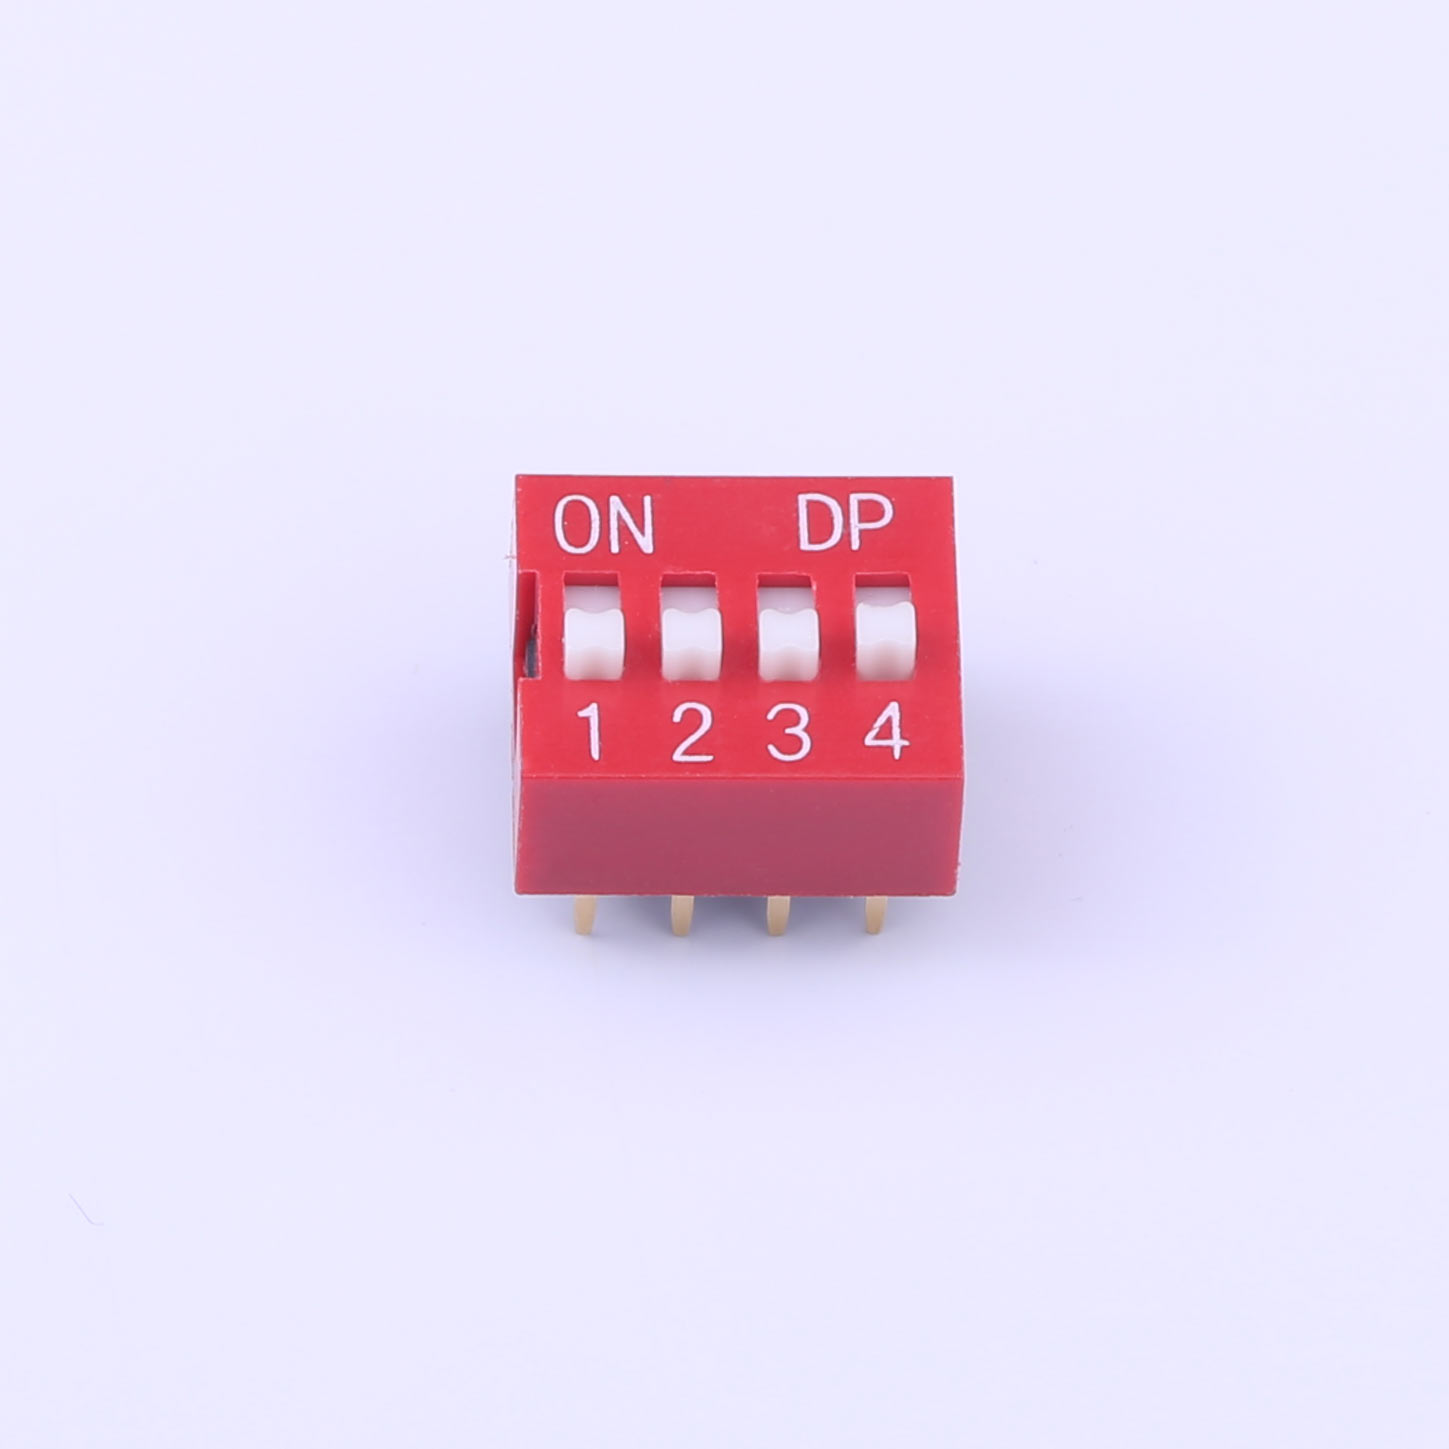 Kinghelm Pitch 2.54mm 8 Positions Red Dip Switch  100mA 24V - KH-BM2.54-4P